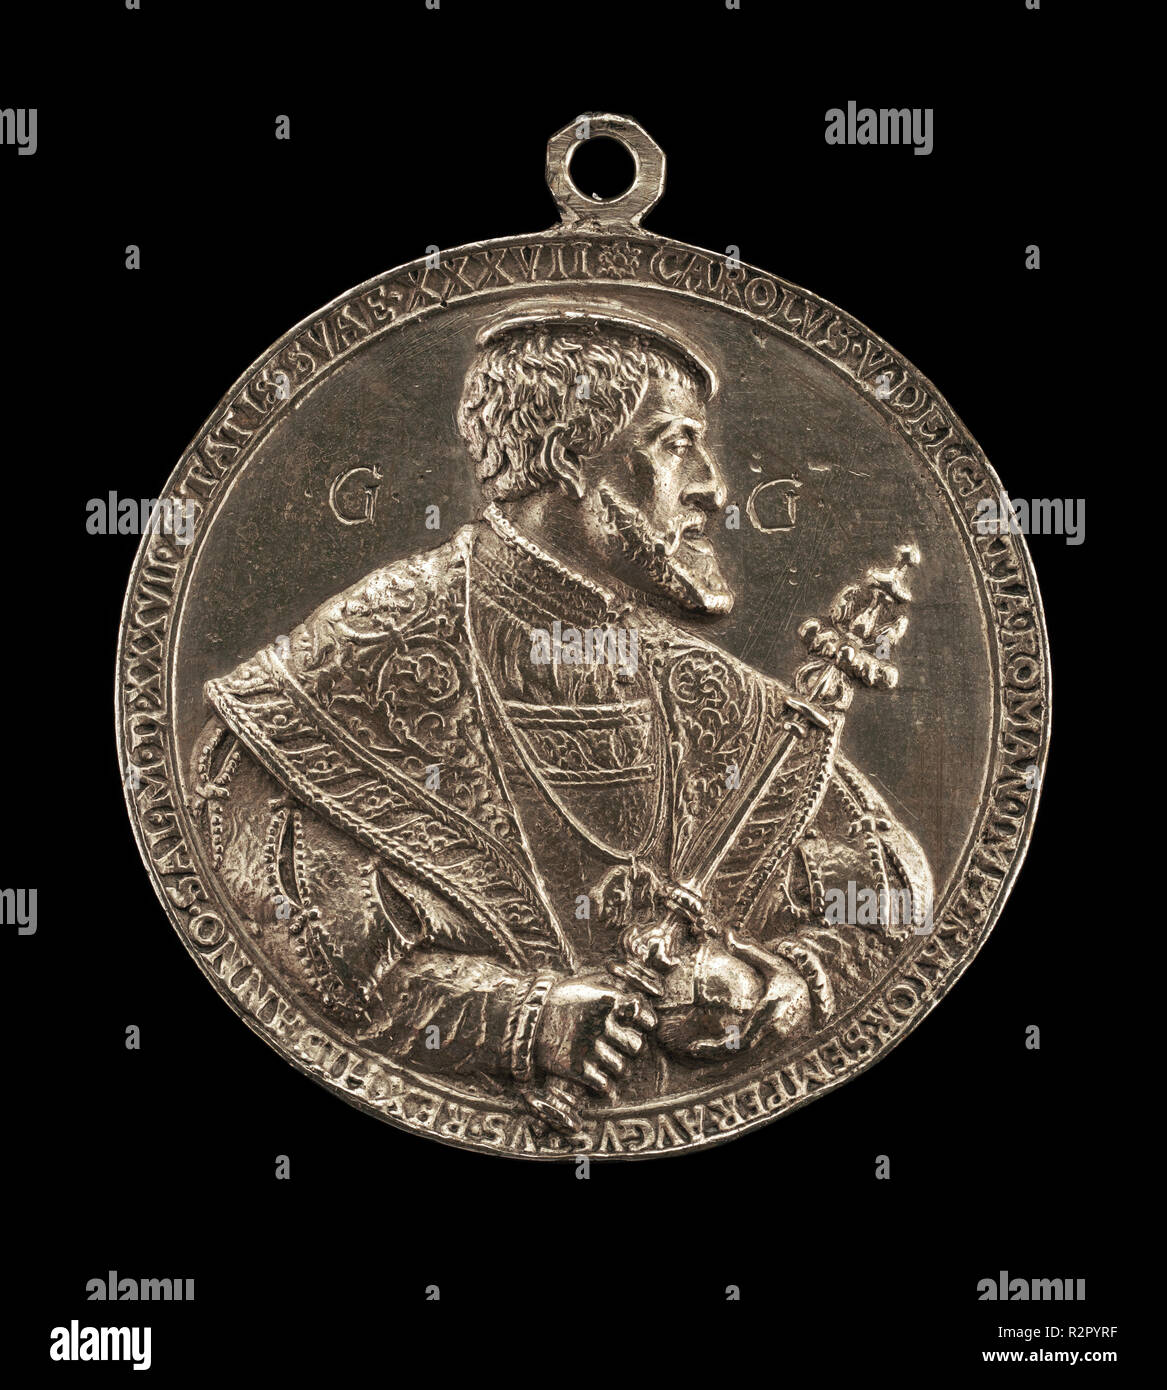 Charles V, 1500-1558, King of Spain 1516-1556, Holy Roman Emperor 1519 [obverse]. Dated: 1537. Dimensions: overall (height with suspension loop): 7.16 cm (2 13/16 in.)  overall (diameter without loop): 6.38 cm (2 1/2 in.)  gross weight: 58.31 gr (0.129 lb.)  axis: 12:00. Medium: silver//With loop. Museum: National Gallery of Art, Washington DC. Author: Hans Reinhart the Elder. Stock Photo